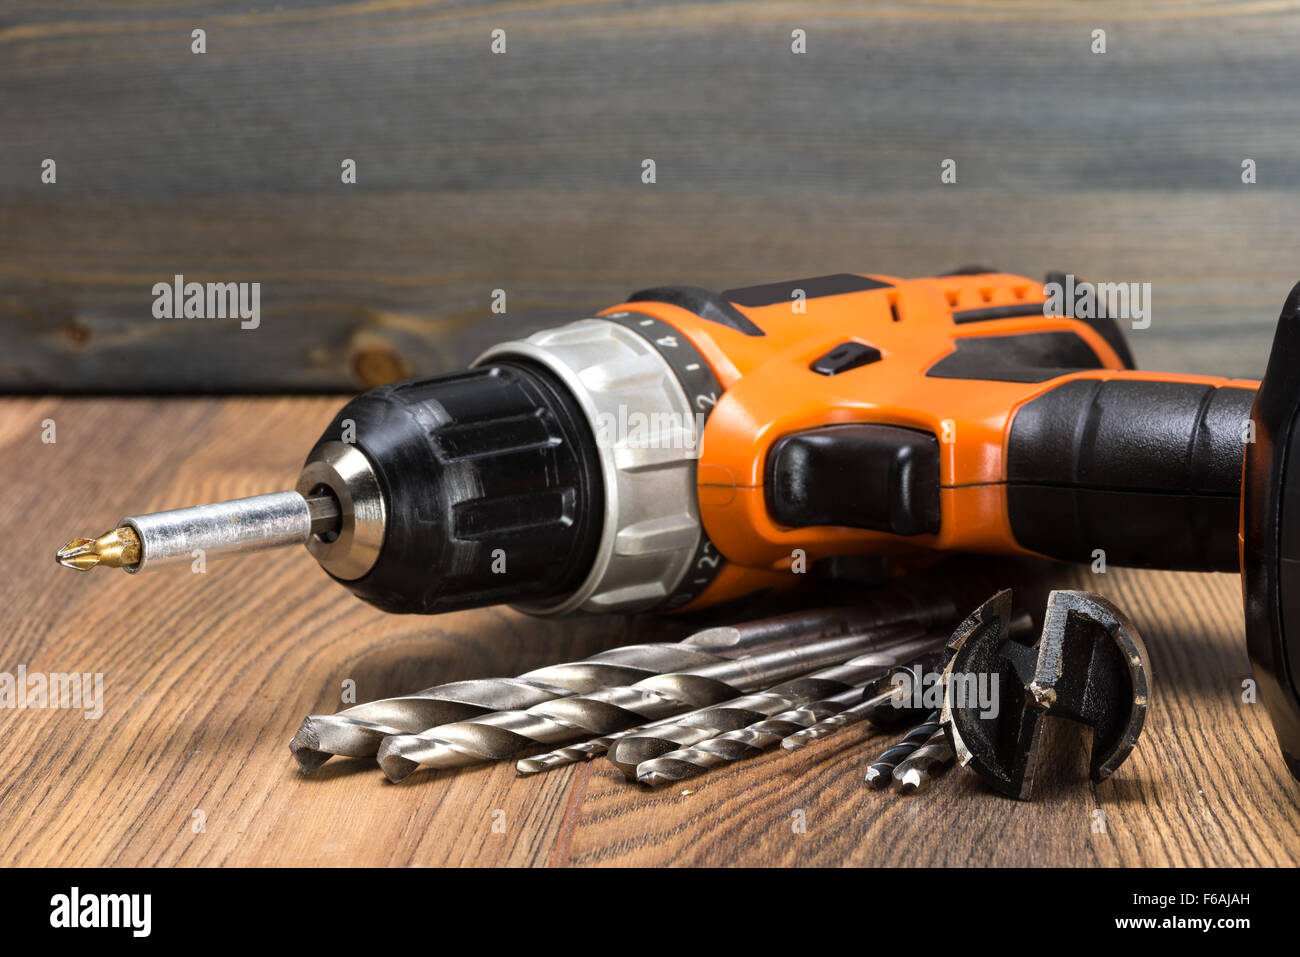 https://c8.alamy.com/comp/F6AJAH/battery-powered-drill-and-drill-on-a-wooden-surface-F6AJAH.jpg